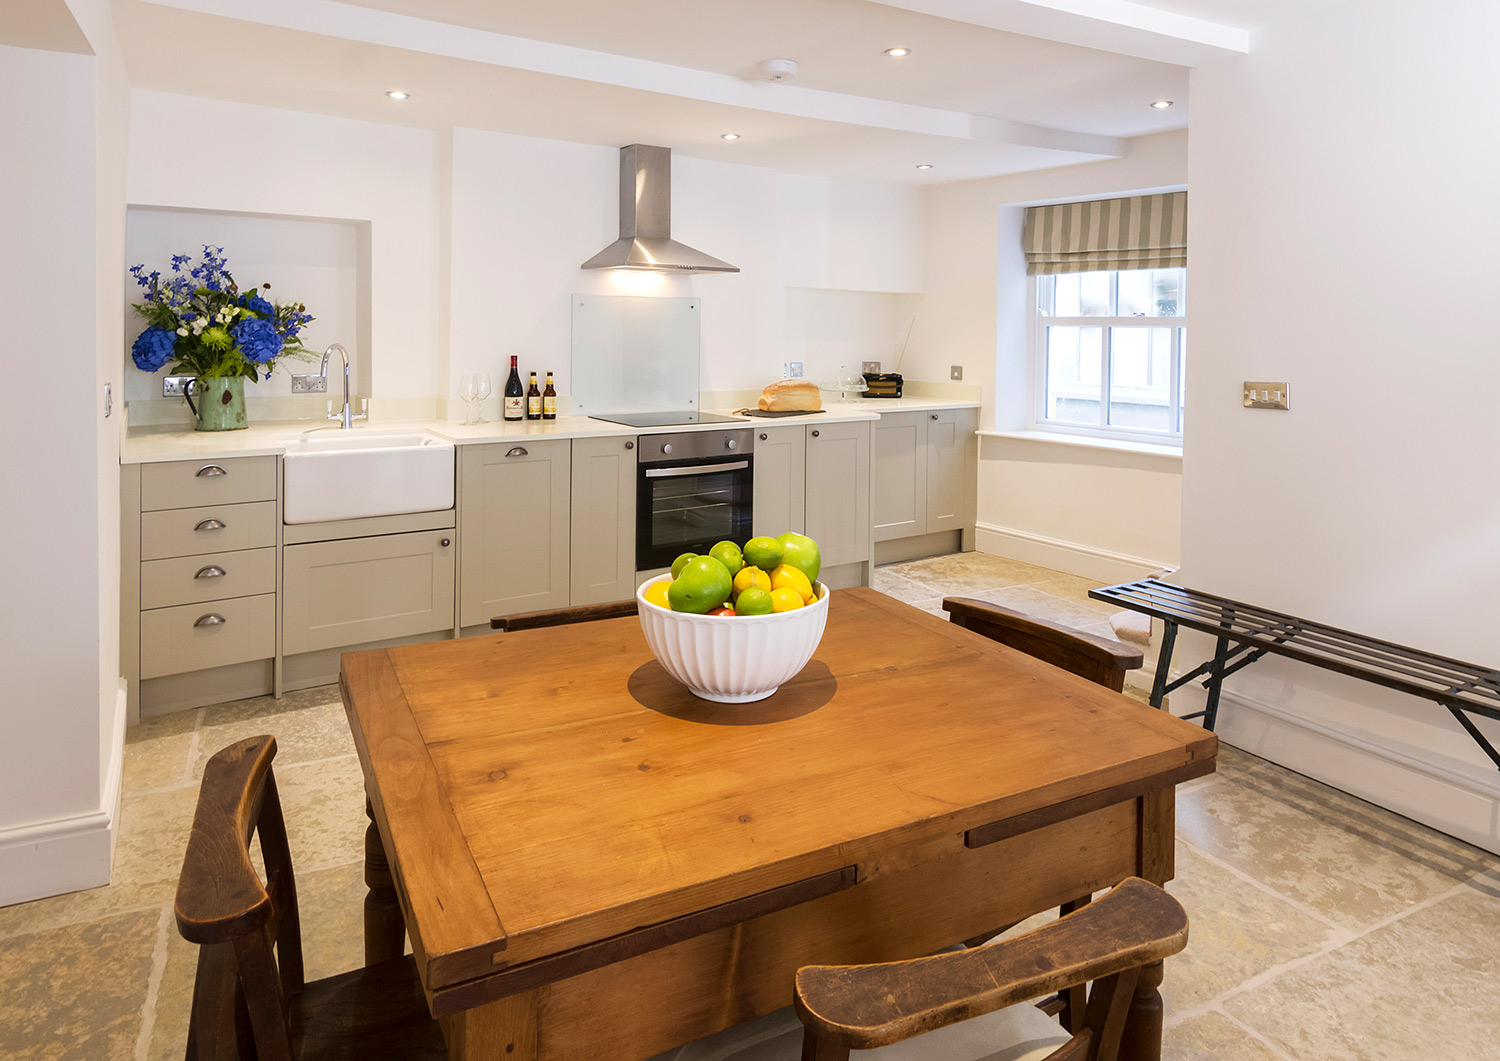 professional photographer kirkby lonsdale cumbria property photography